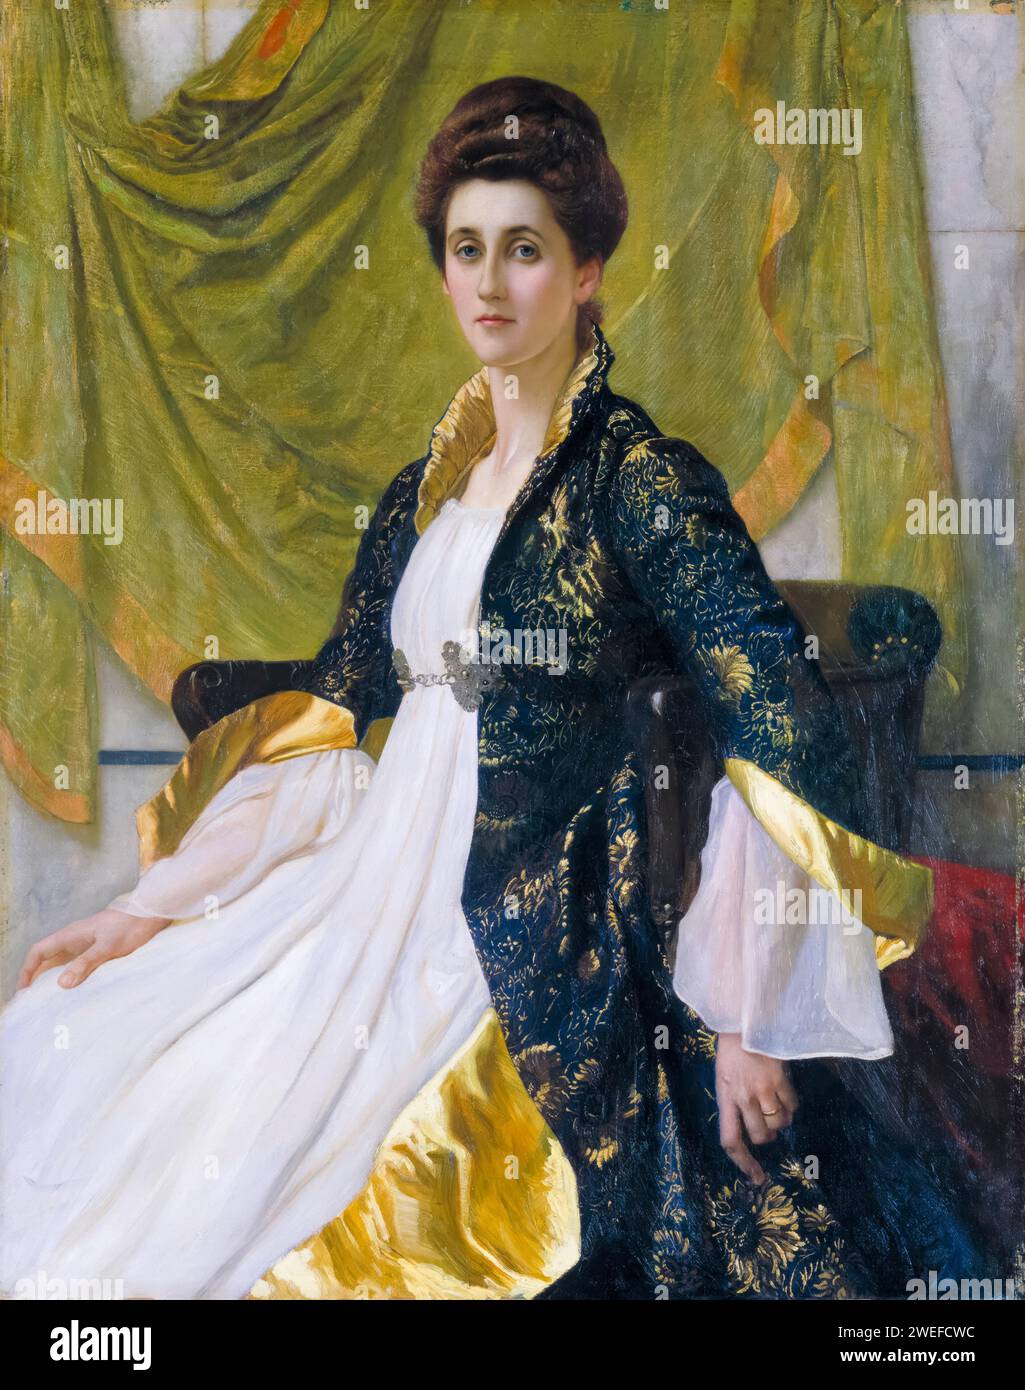 Mrs Ernest Moon (Emma Moon), portrait painting in oil on canvas by William Blake Richmond, 1888 Stock Photo